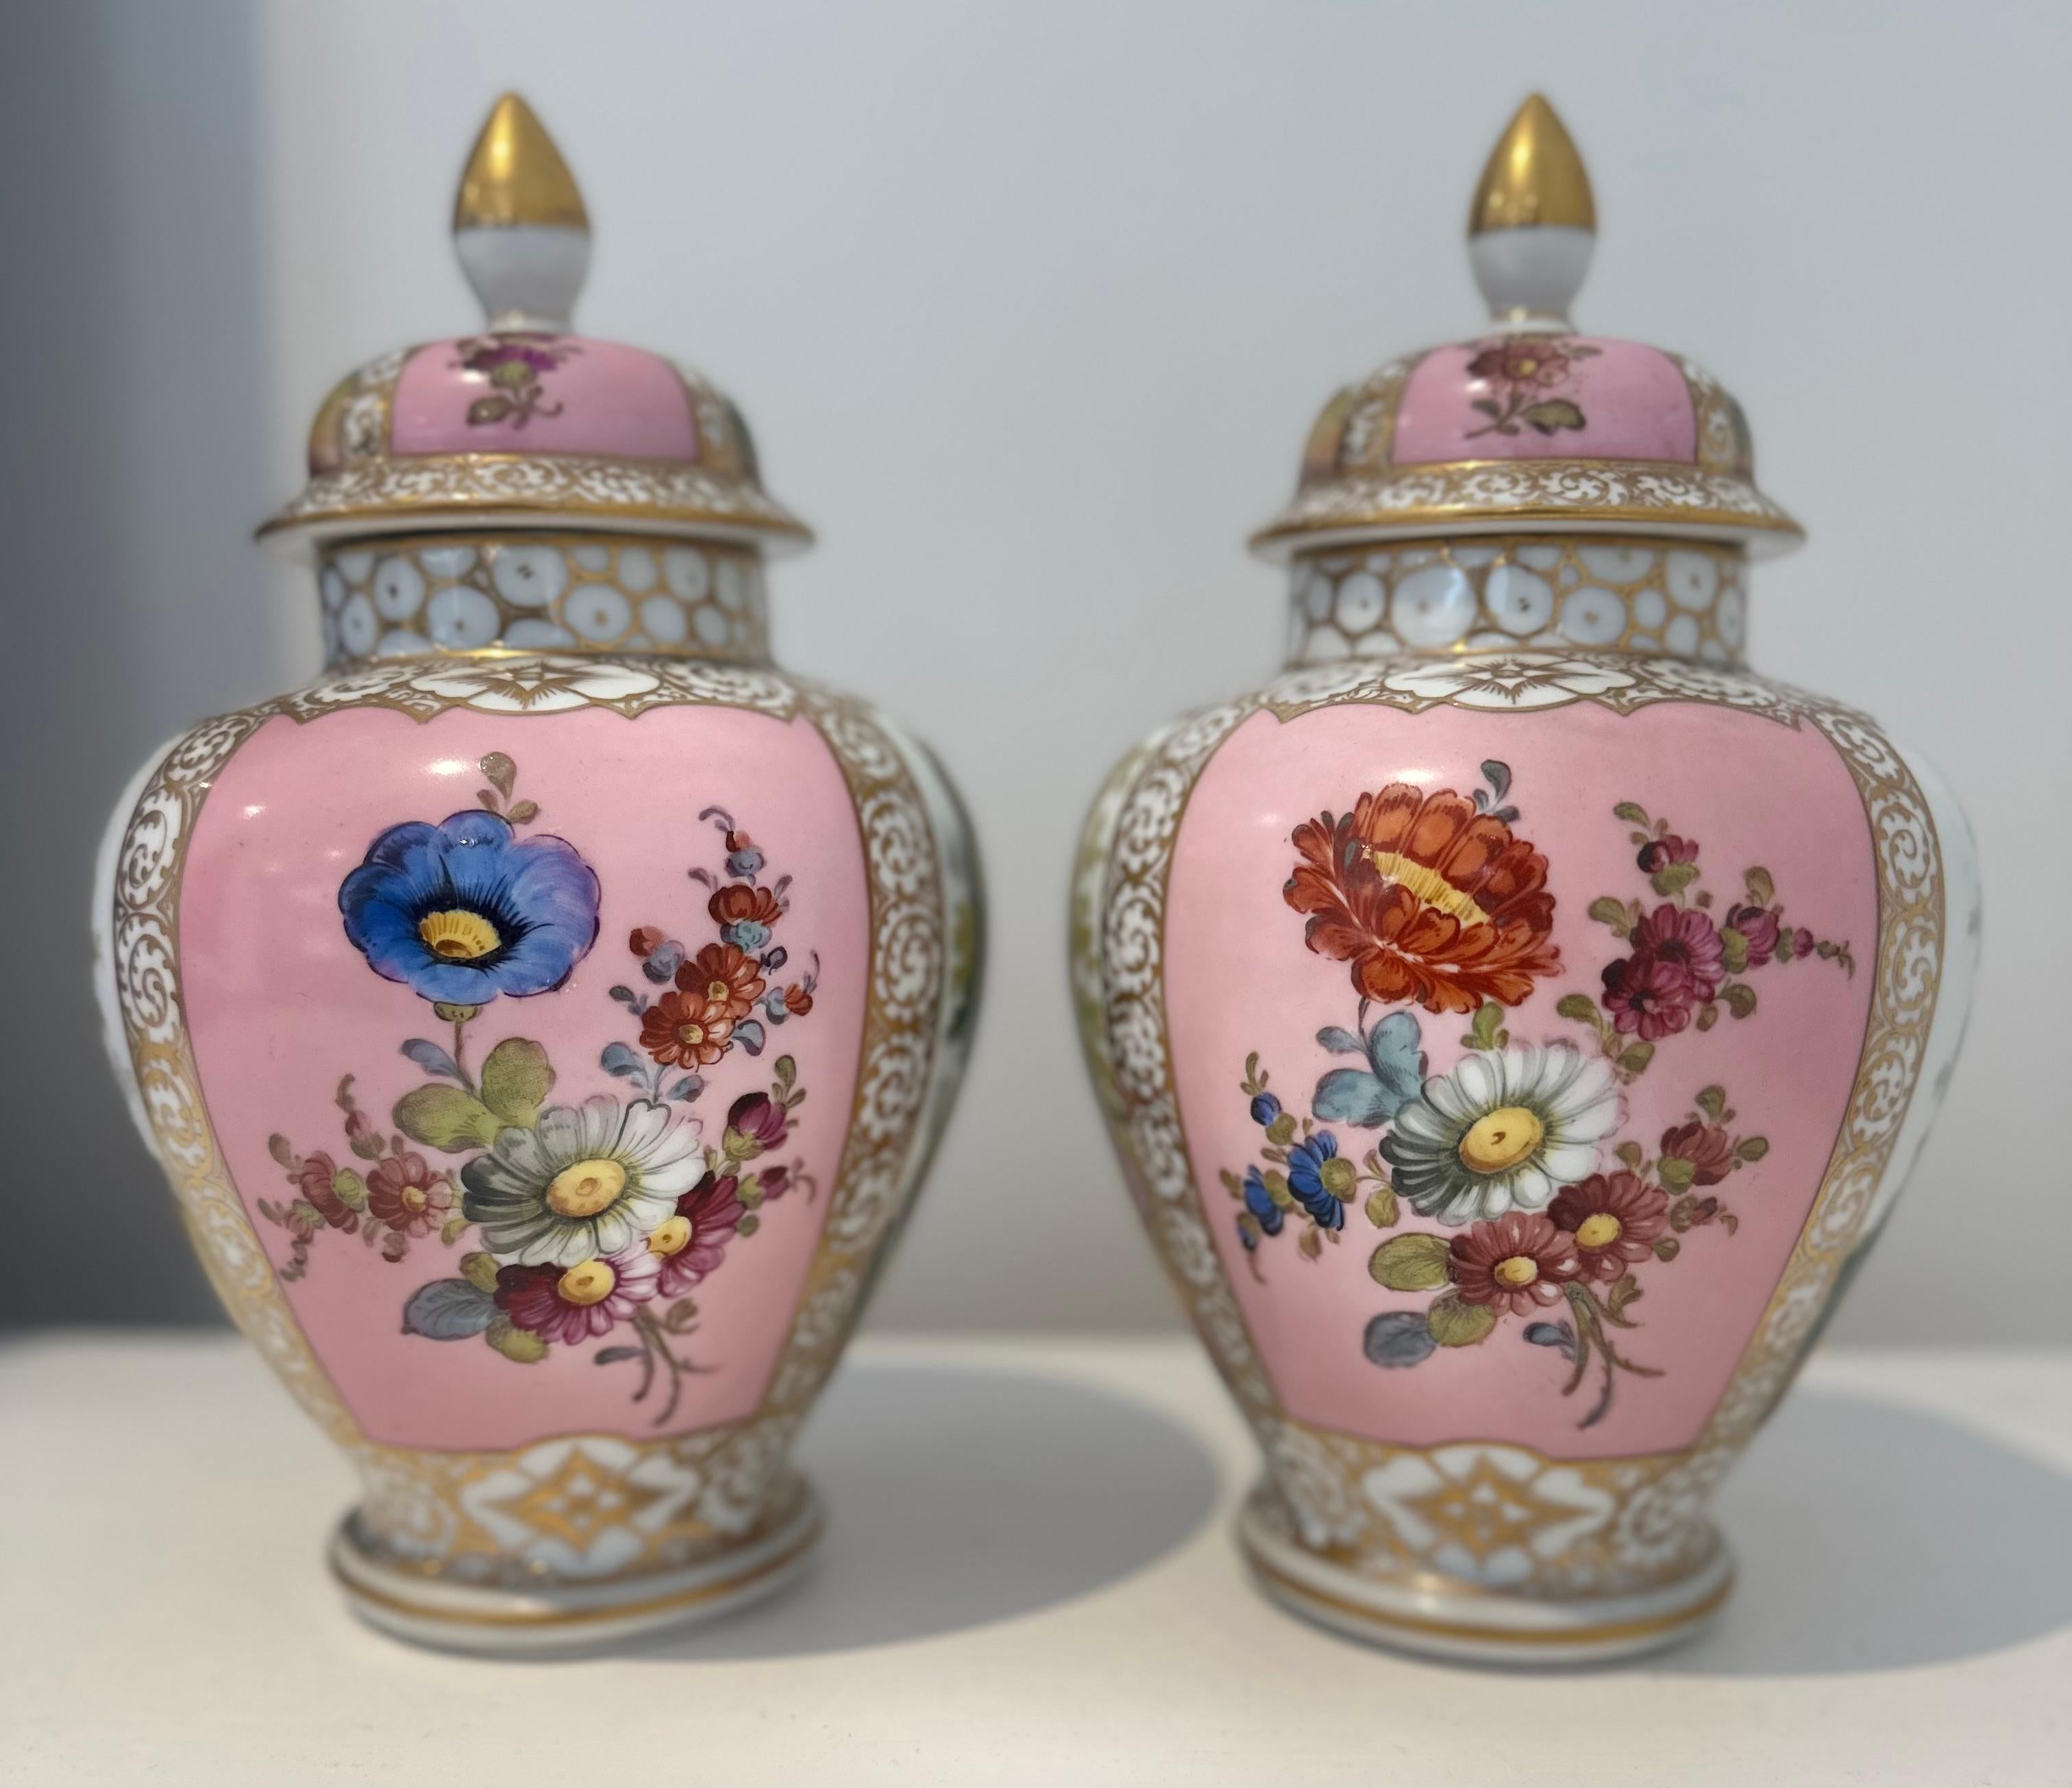 A lovely pair of hand painted porcelain urns with lidded tops . Reflecting scenes of ladies and gentlemen surrounded by flowers and foliage. 